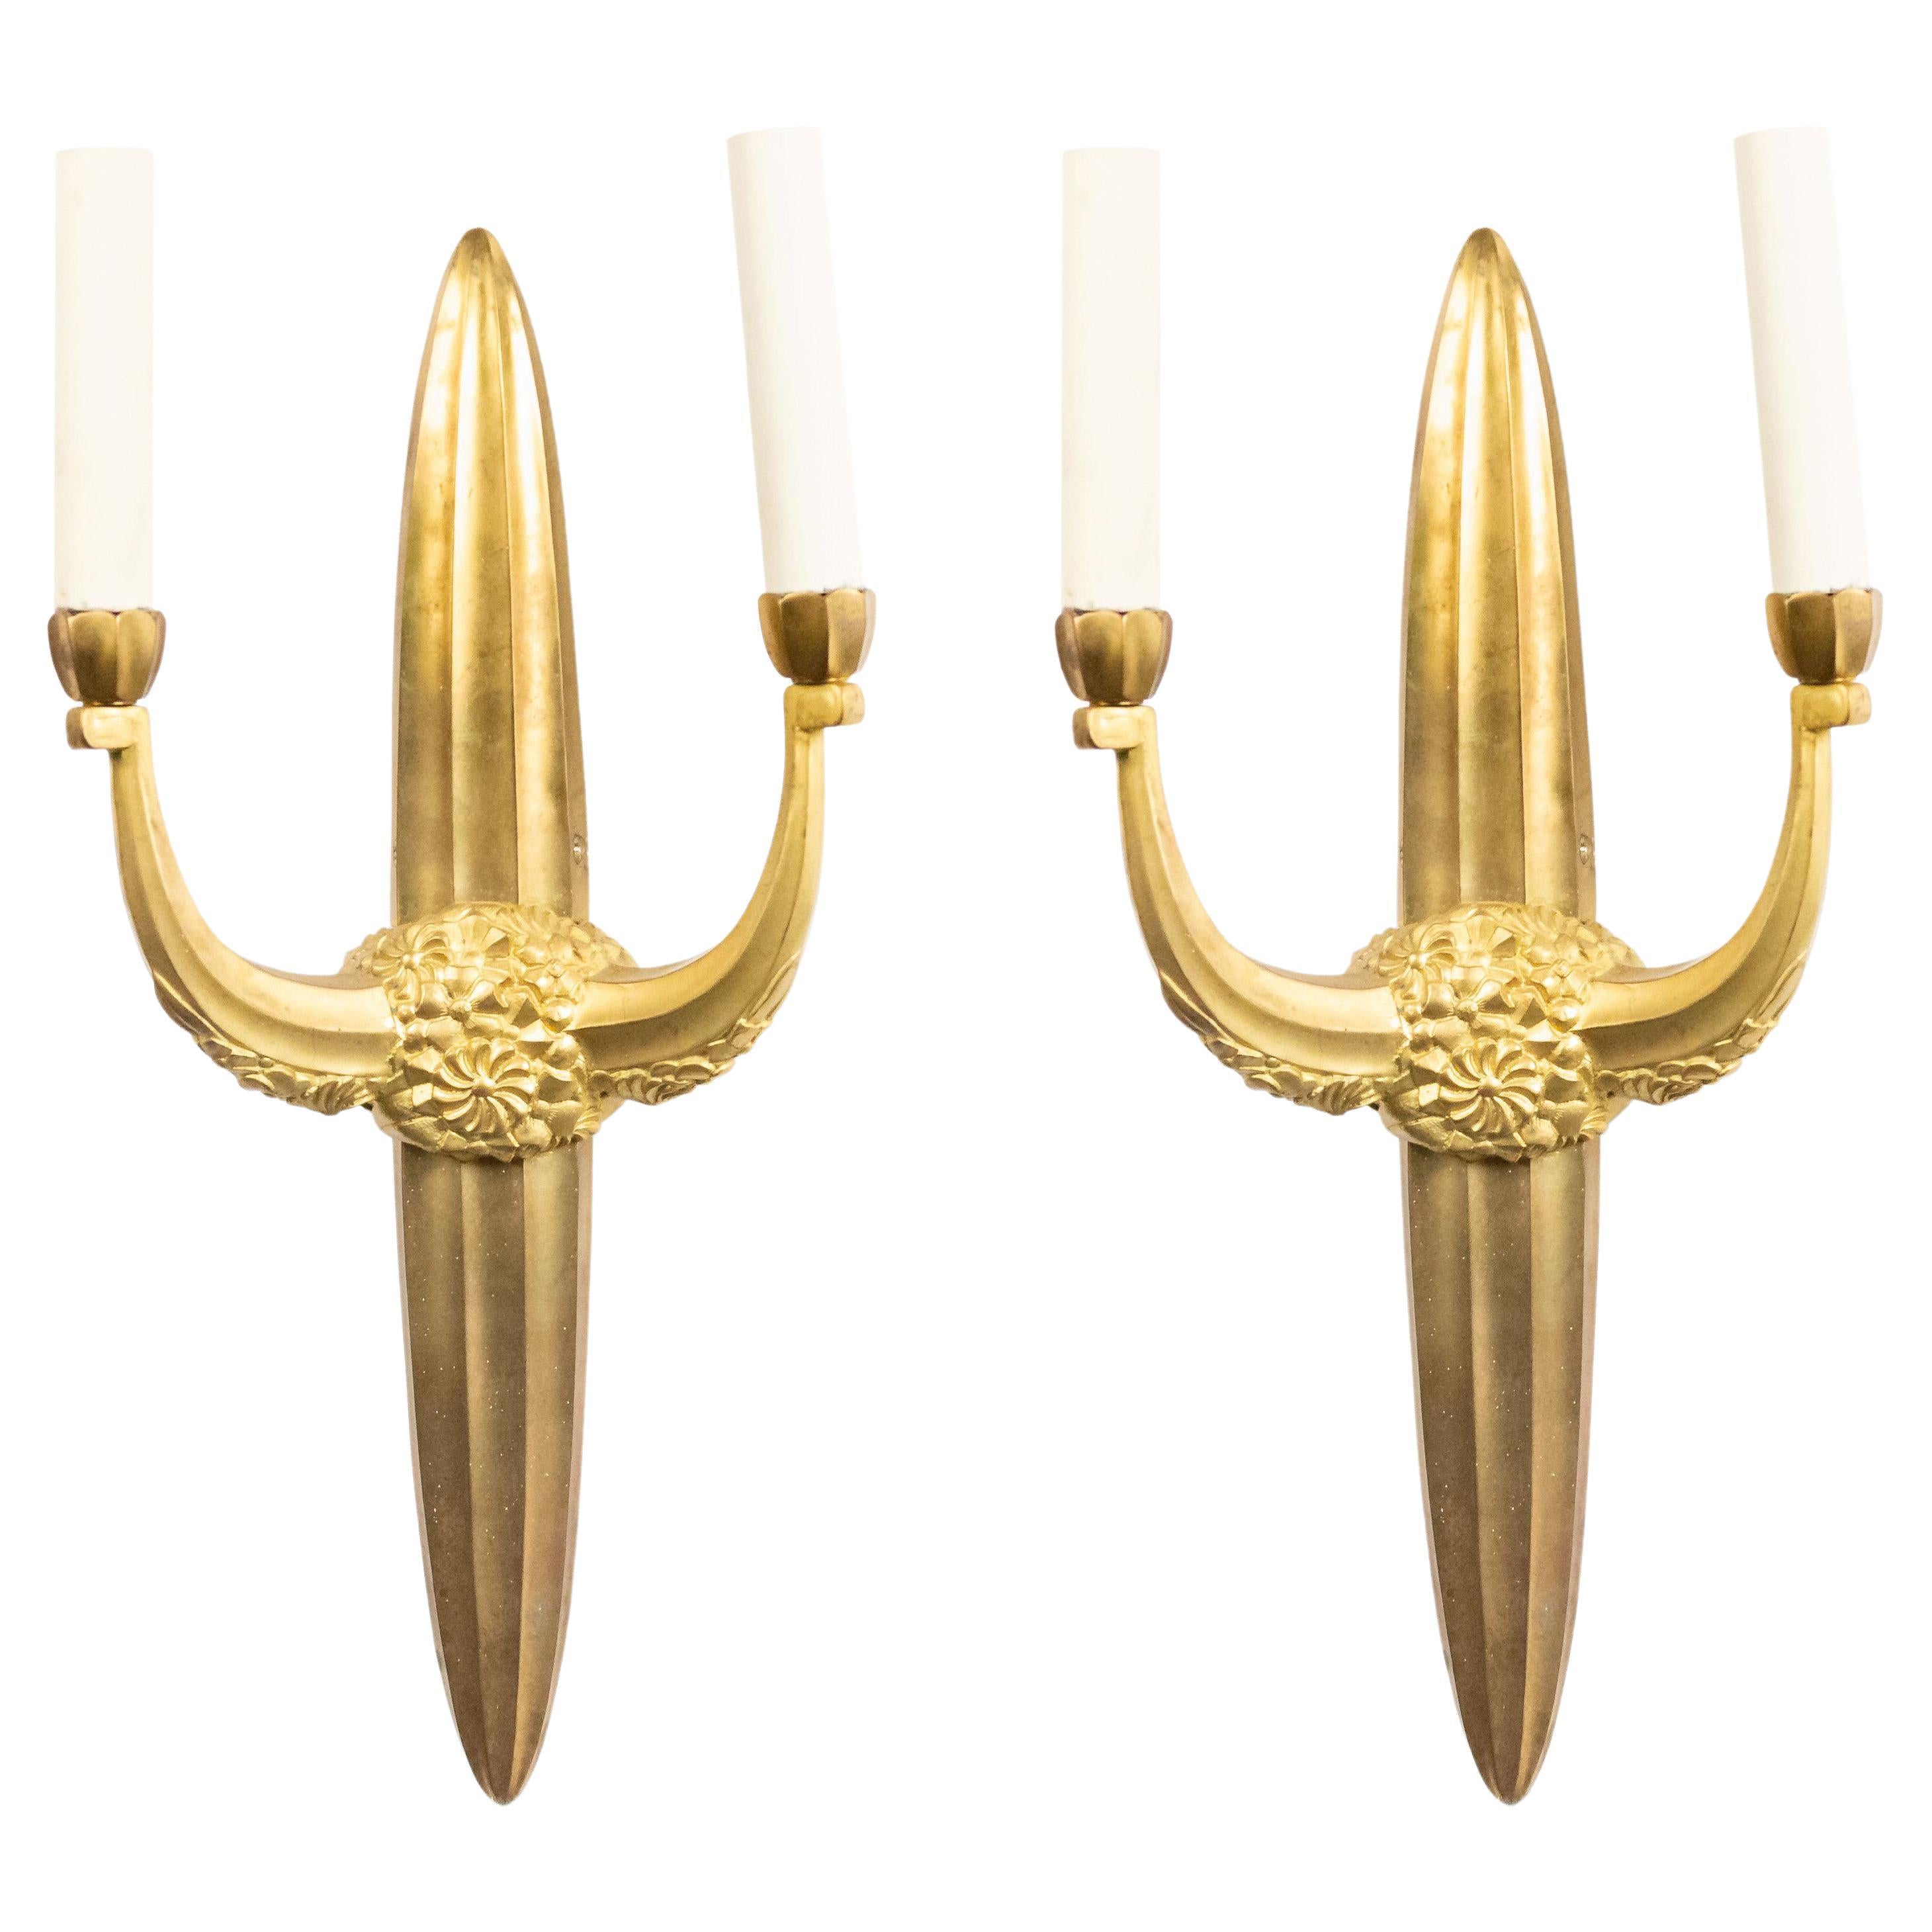 French Art Deco Style Bronze Dore Wall Sconces 'Manner of Sue et Mare' For Sale